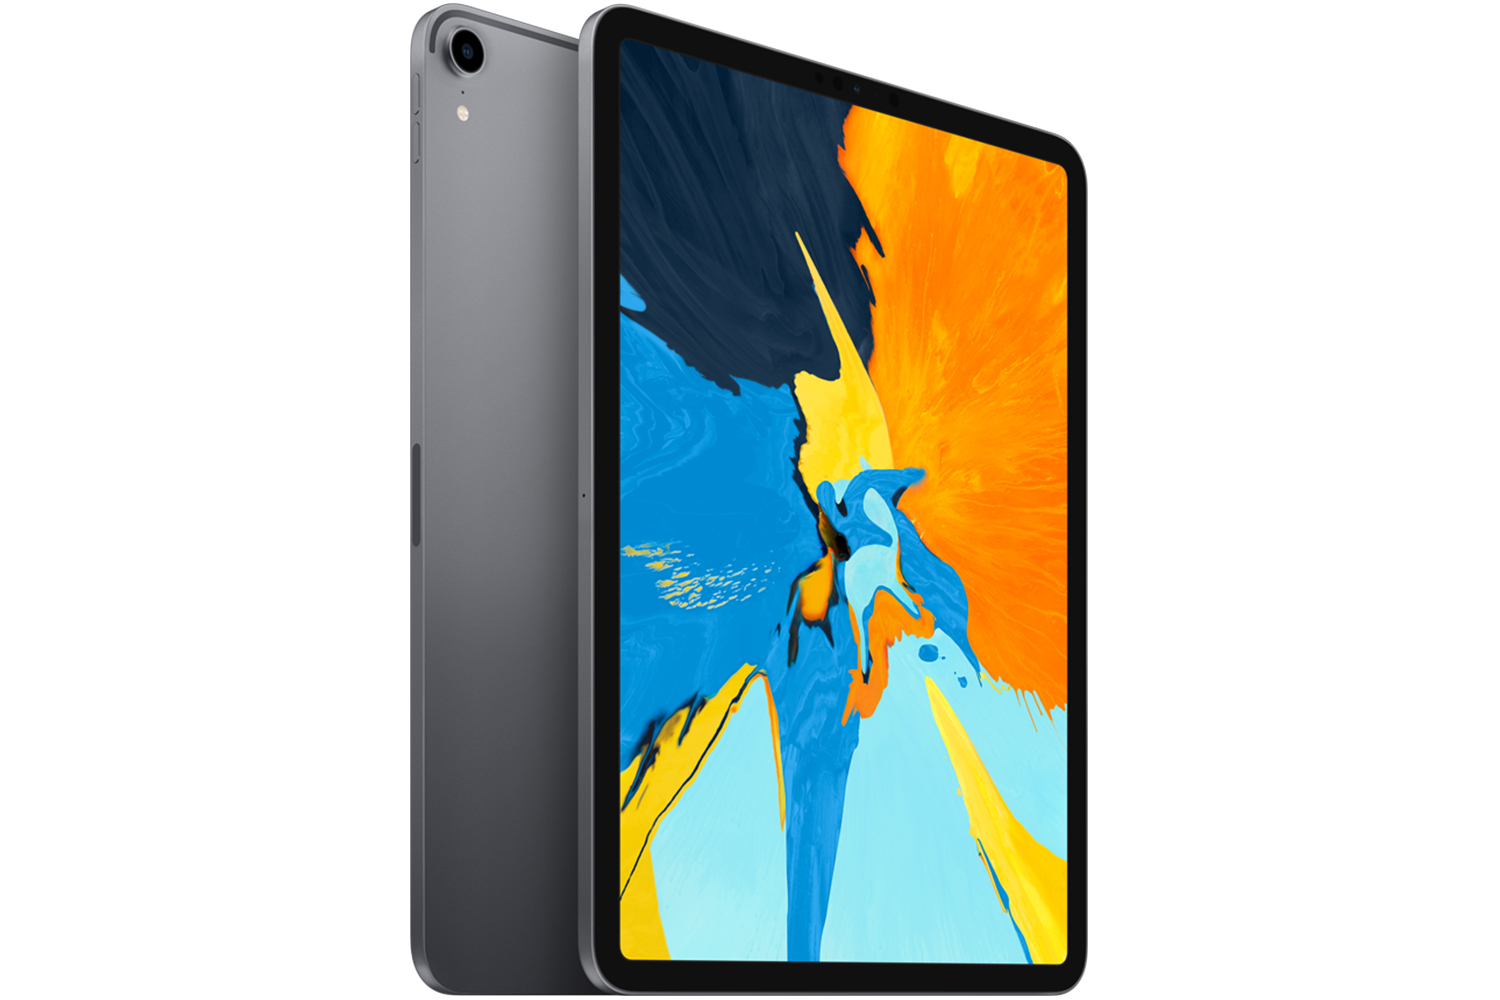 New Zealand government, education and corporate Apple iPad Pro 10.5 and iPad Pro 12.9 supplier - The Laptop Company